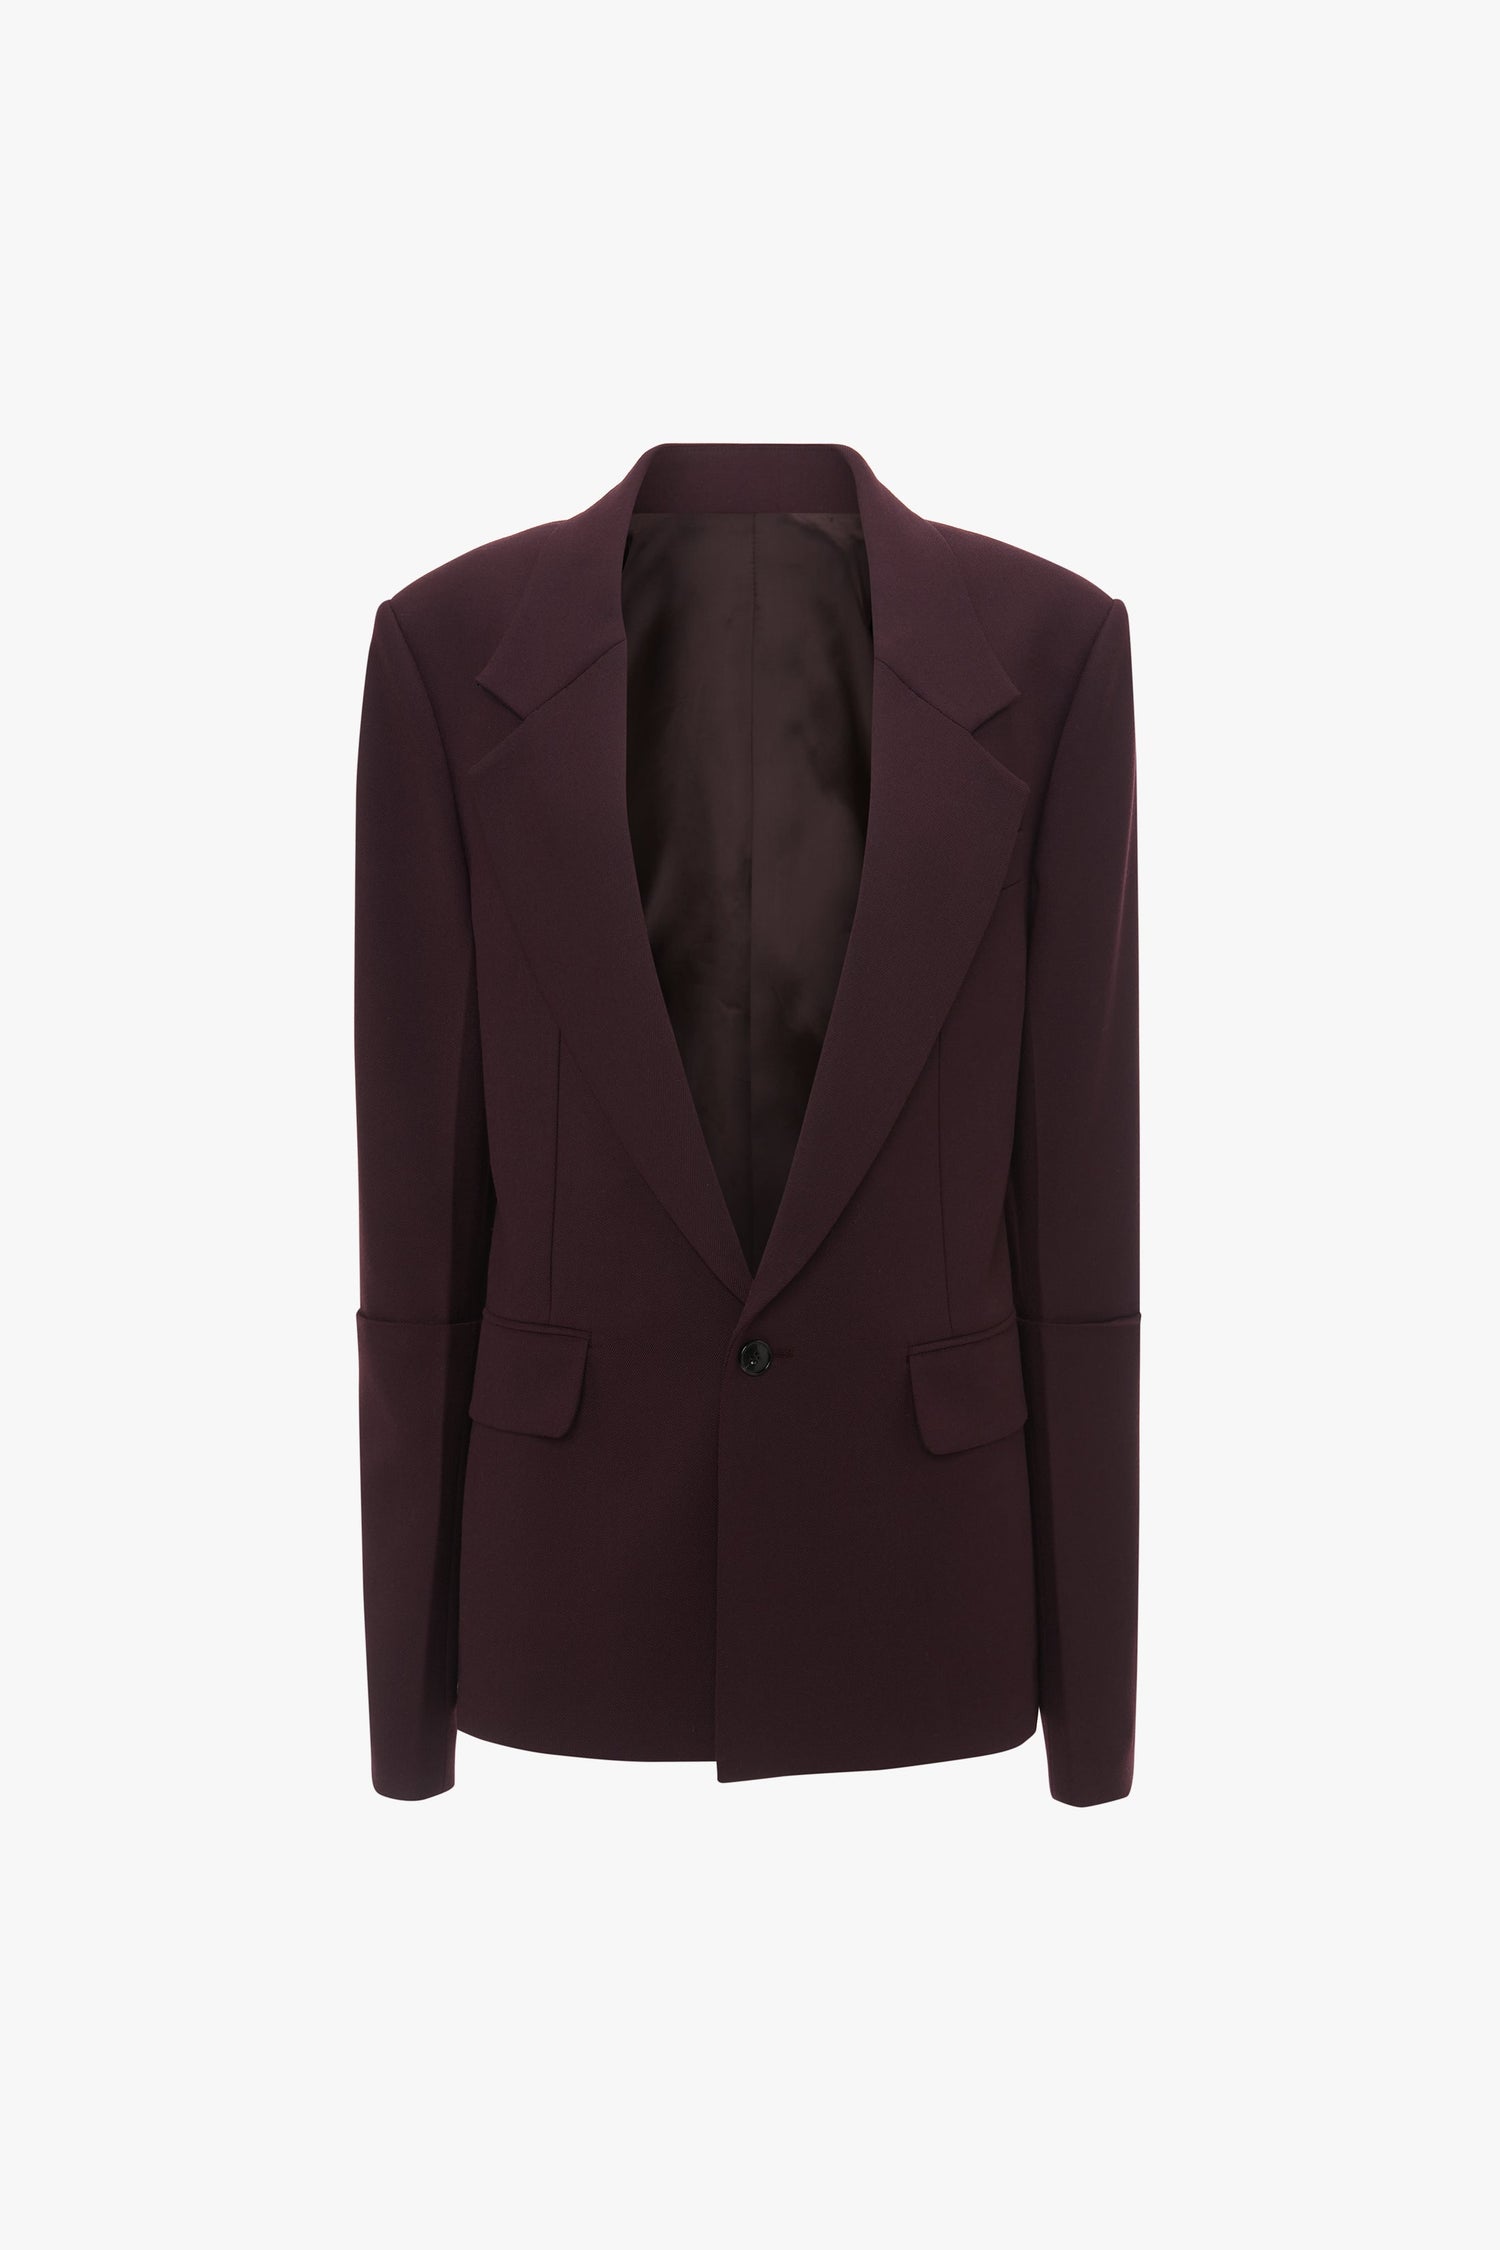 A deep mahogany **Victoria Beckham Sleeve Detail Patch Pocket Jacket in Deep Mahogany** with wide lapels and a single front button is elegantly displayed against a white background.